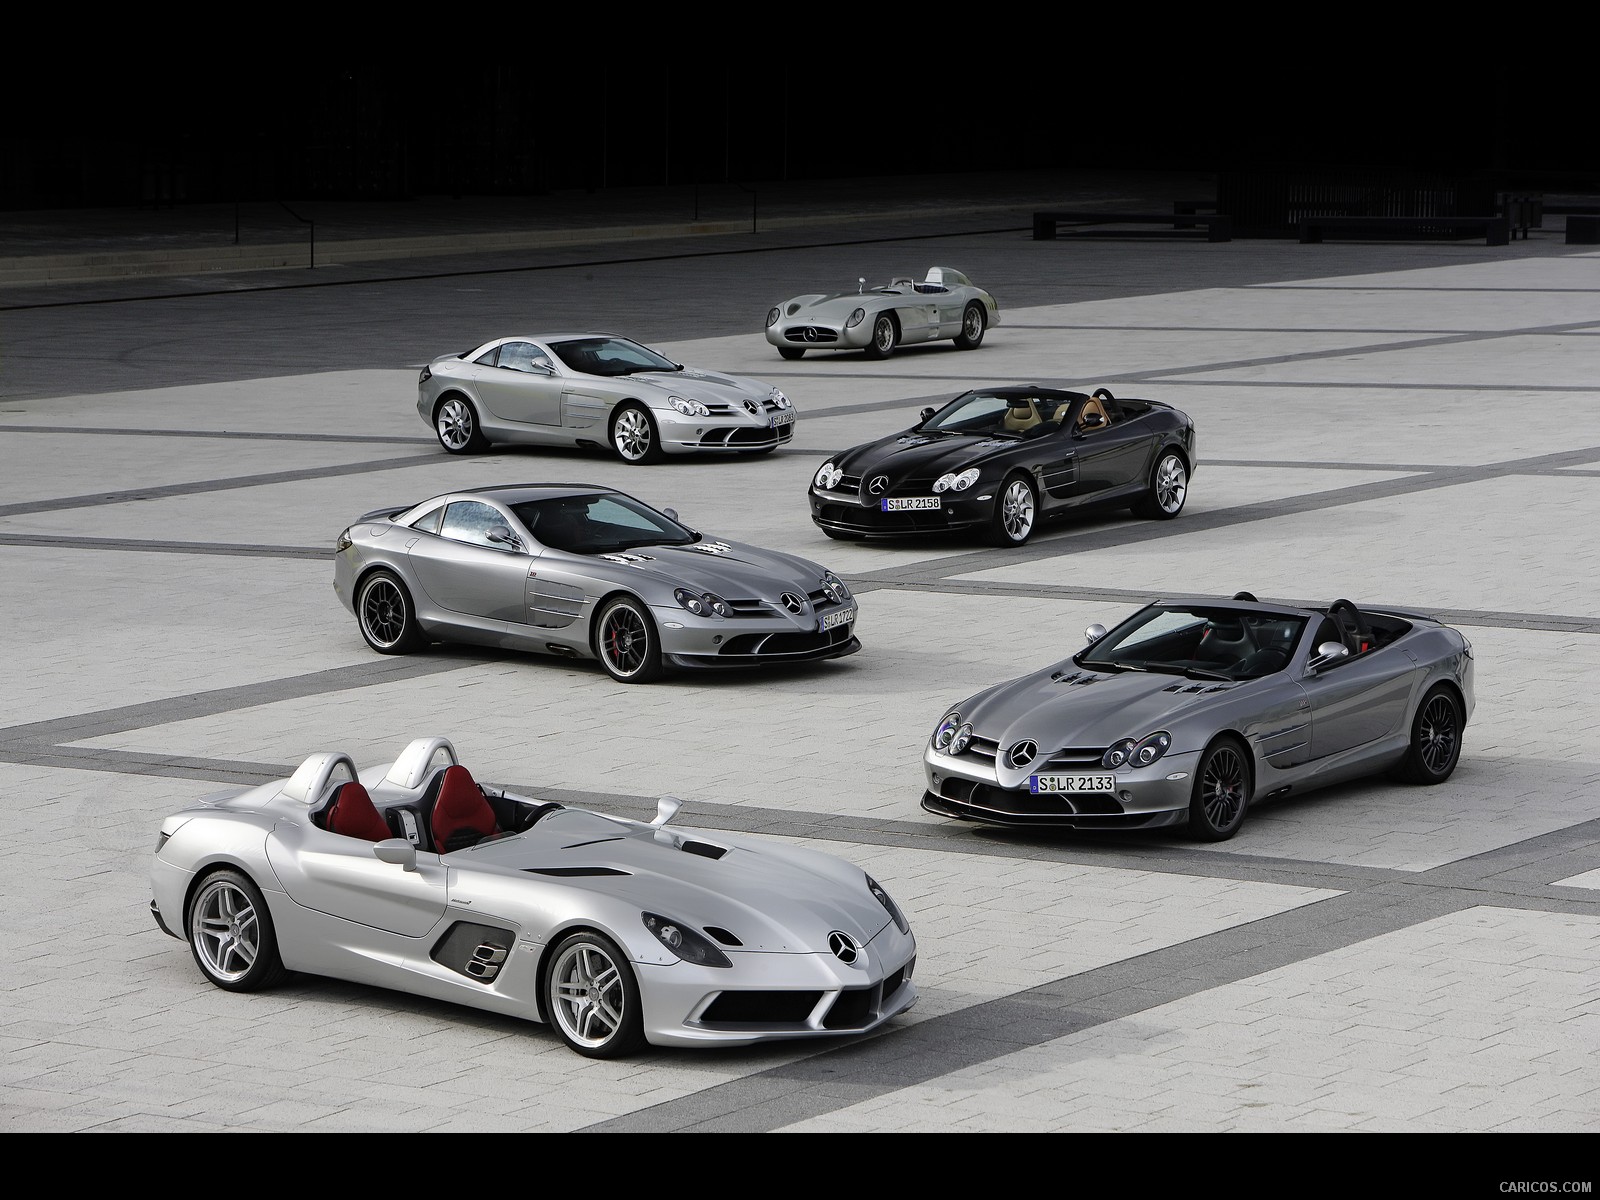 Mercedes-Benz SLR Stirling Moss and MB Lineup - , #54 of 54